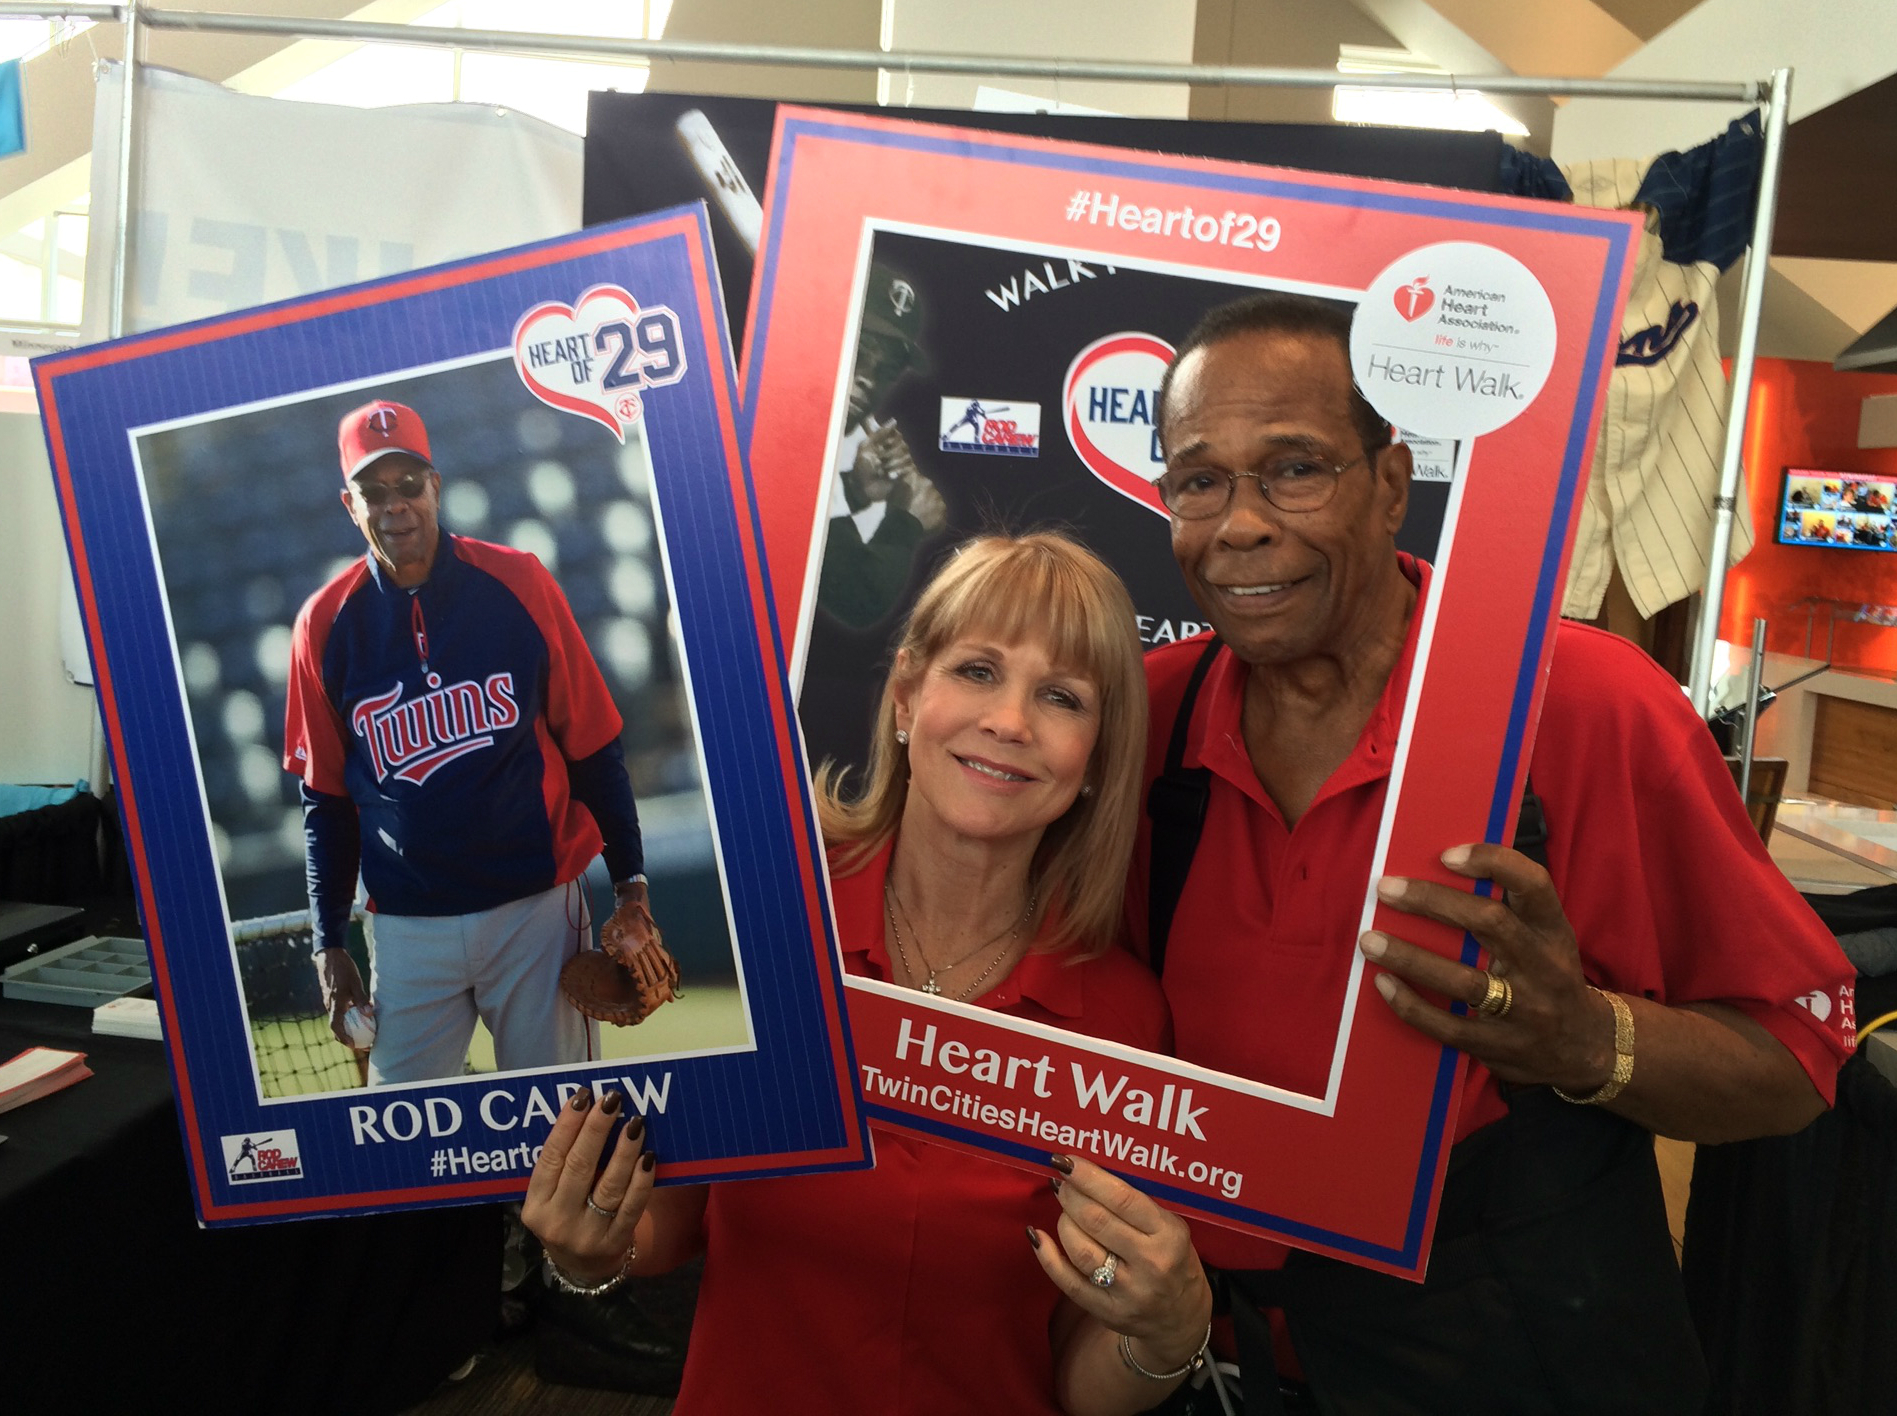 As He Seeks A New Heart, Rod Carew Urges You to Improve Your Heart